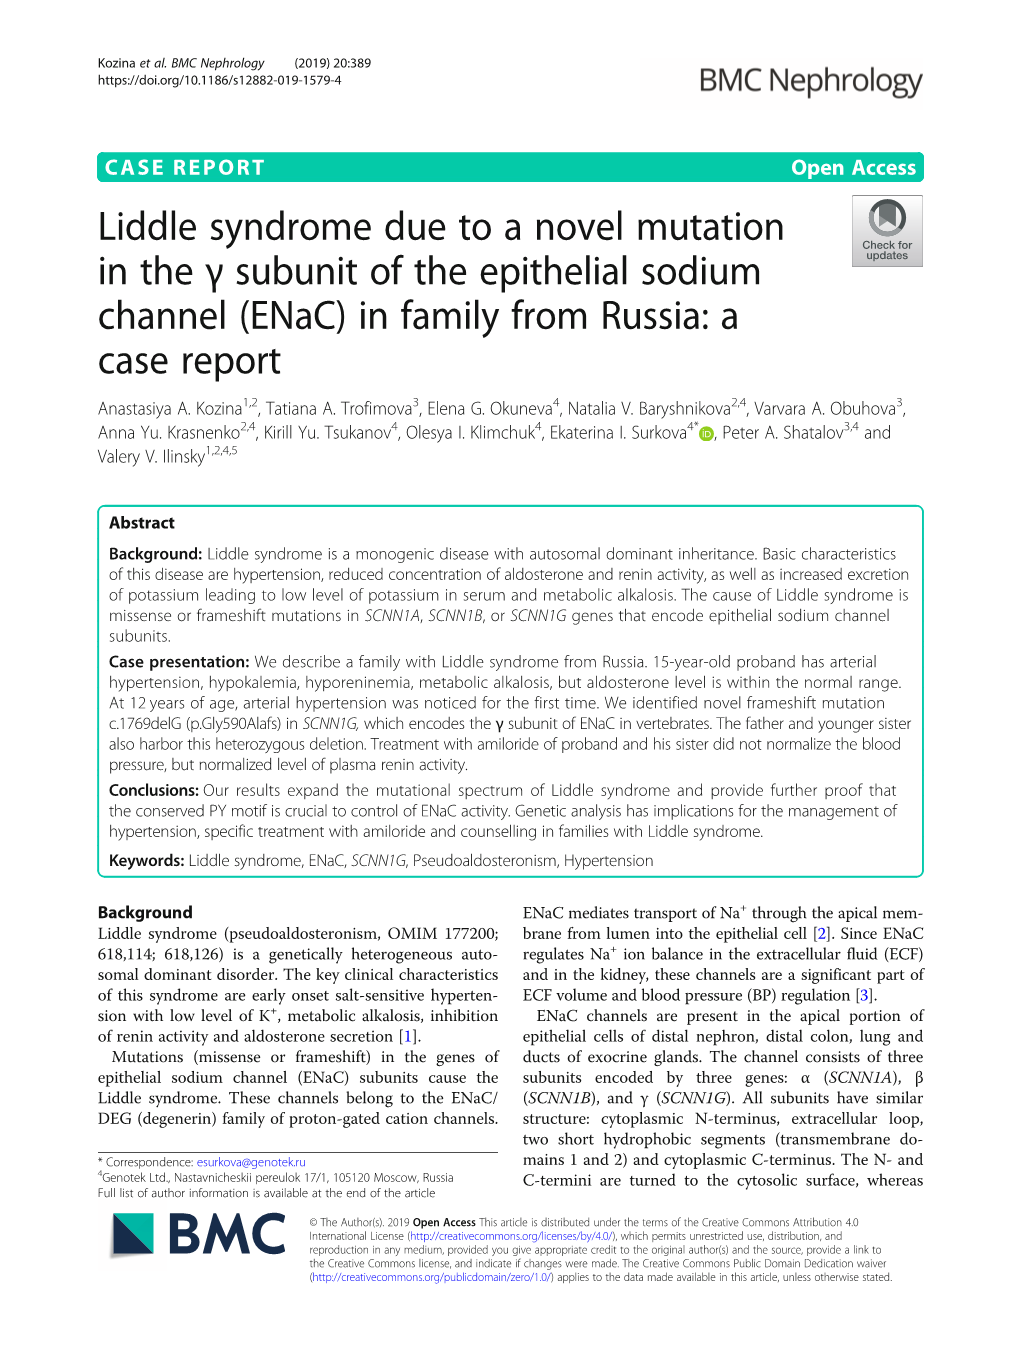 Liddle Syndrome Due to a Novel Mutation in the Γ Subunit of the Epithelial Sodium Channel (Enac) in Family from Russia: a Case Report Anastasiya A